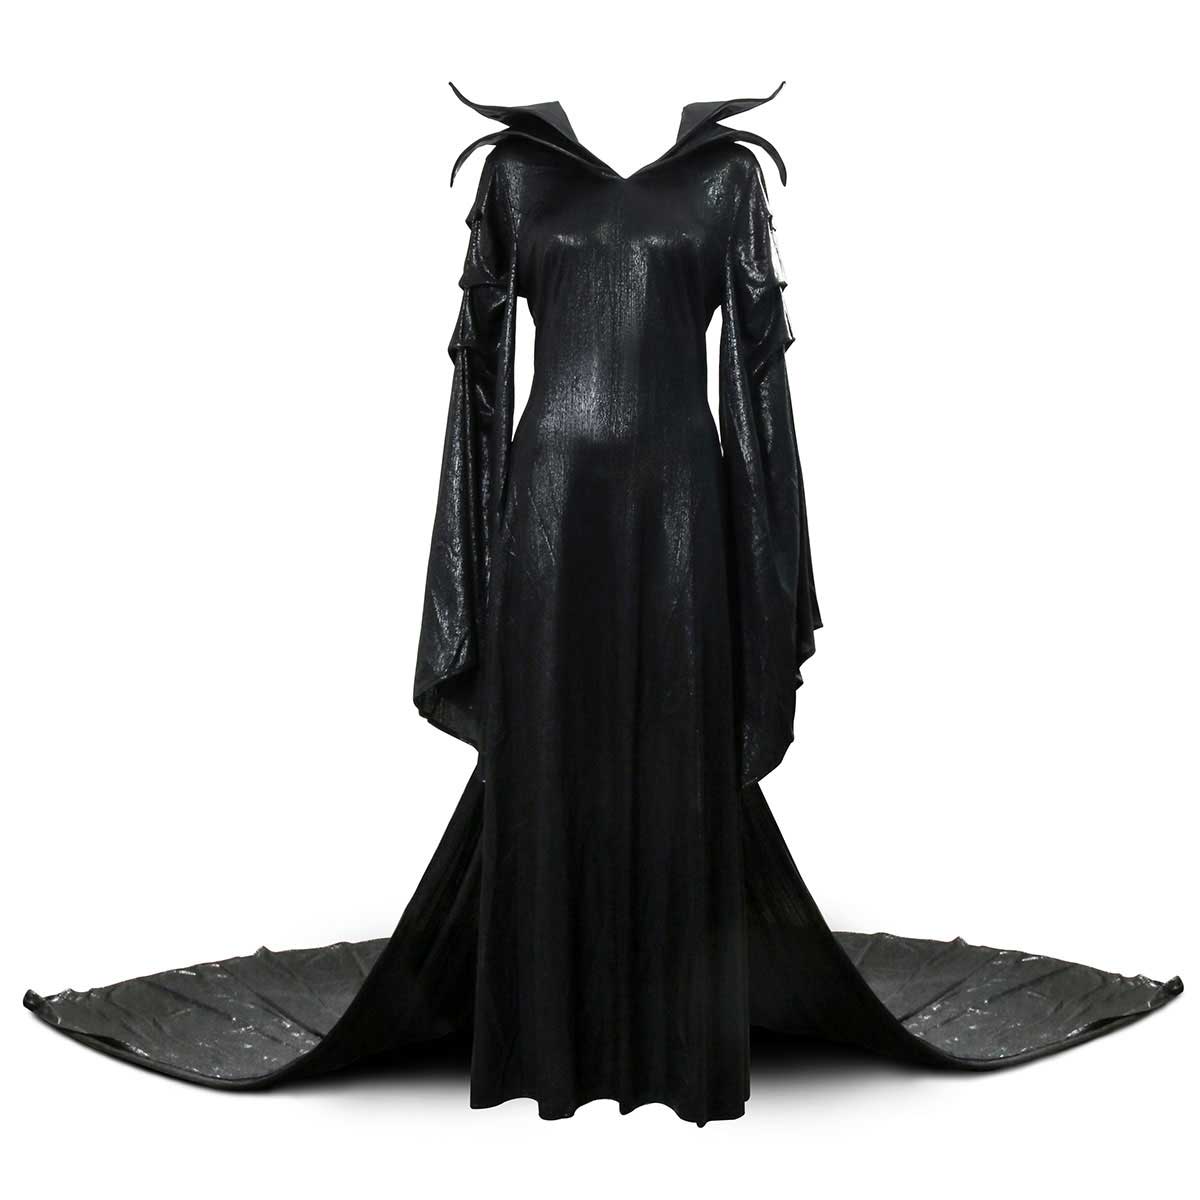 Maleficent 2 Mistress of Evil  Cosplay Costume Uniform Outfit Suit Black Dress